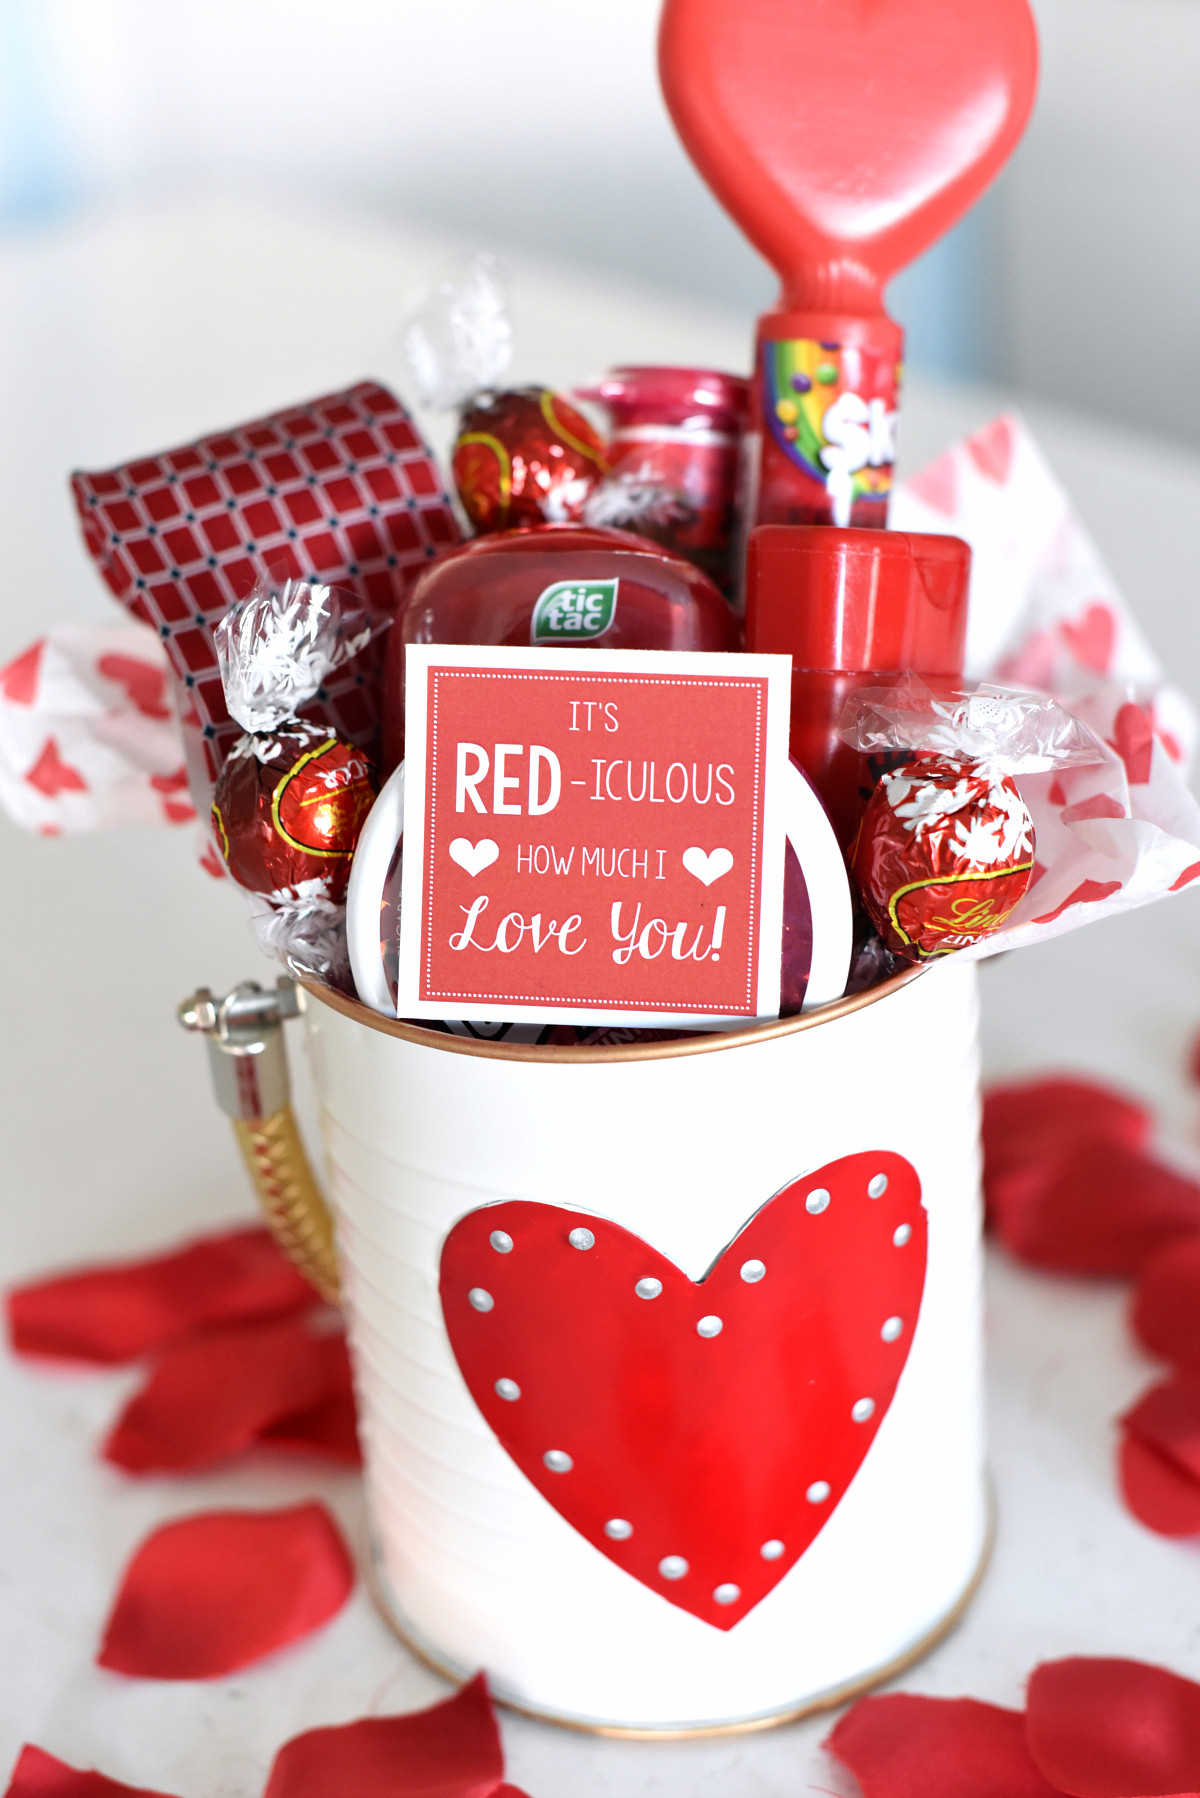 Valentine Gift Ideas For Your Husband
 Cute Valentine s Day Gift Idea RED iculous Basket